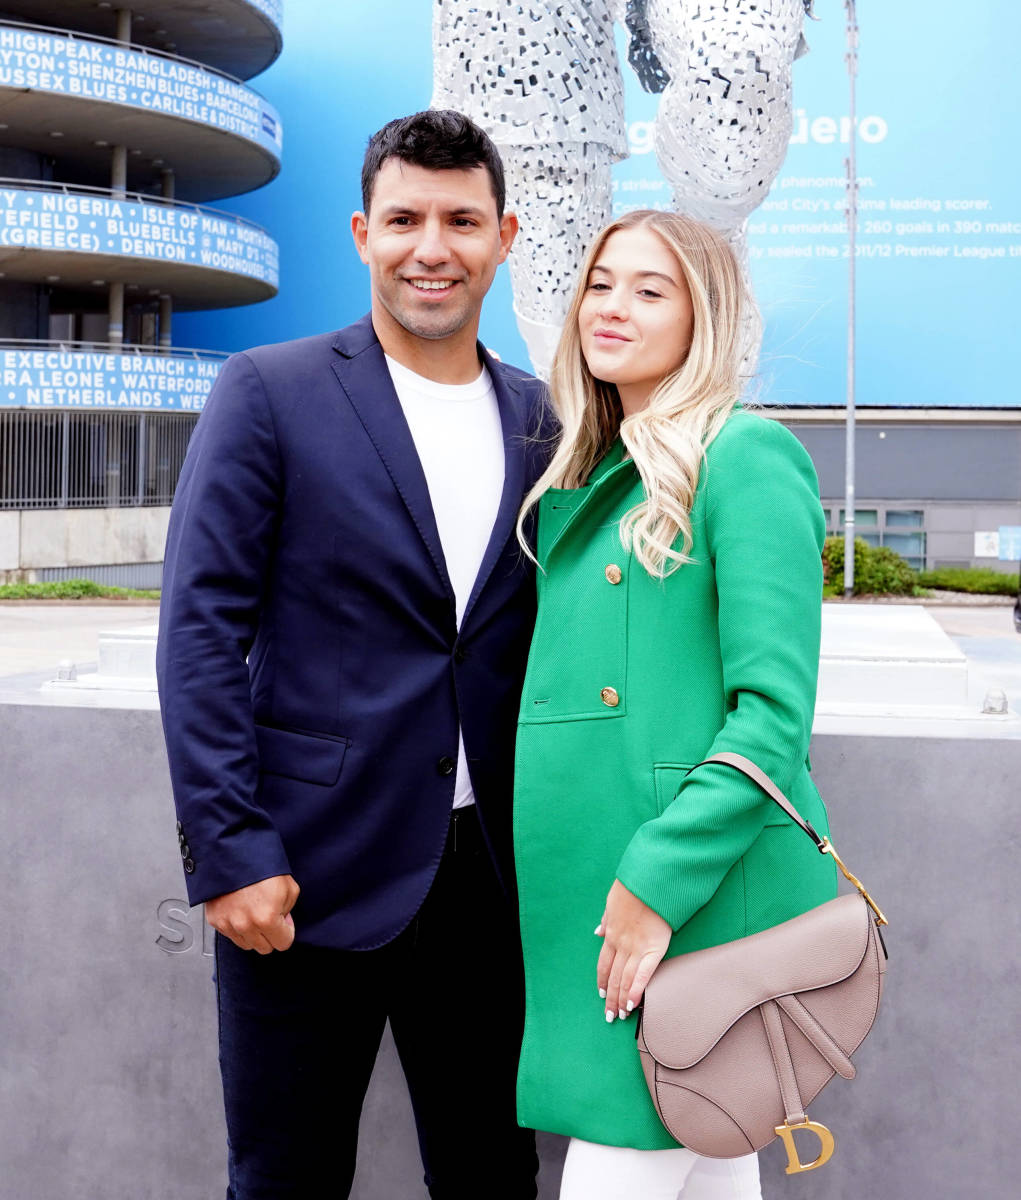 Sergio Aguero pictured with girlfriend Sofia Calzetti outside the Etihad Stadium in May 2022 on the day Manchester City unveiled a statue of their former striker